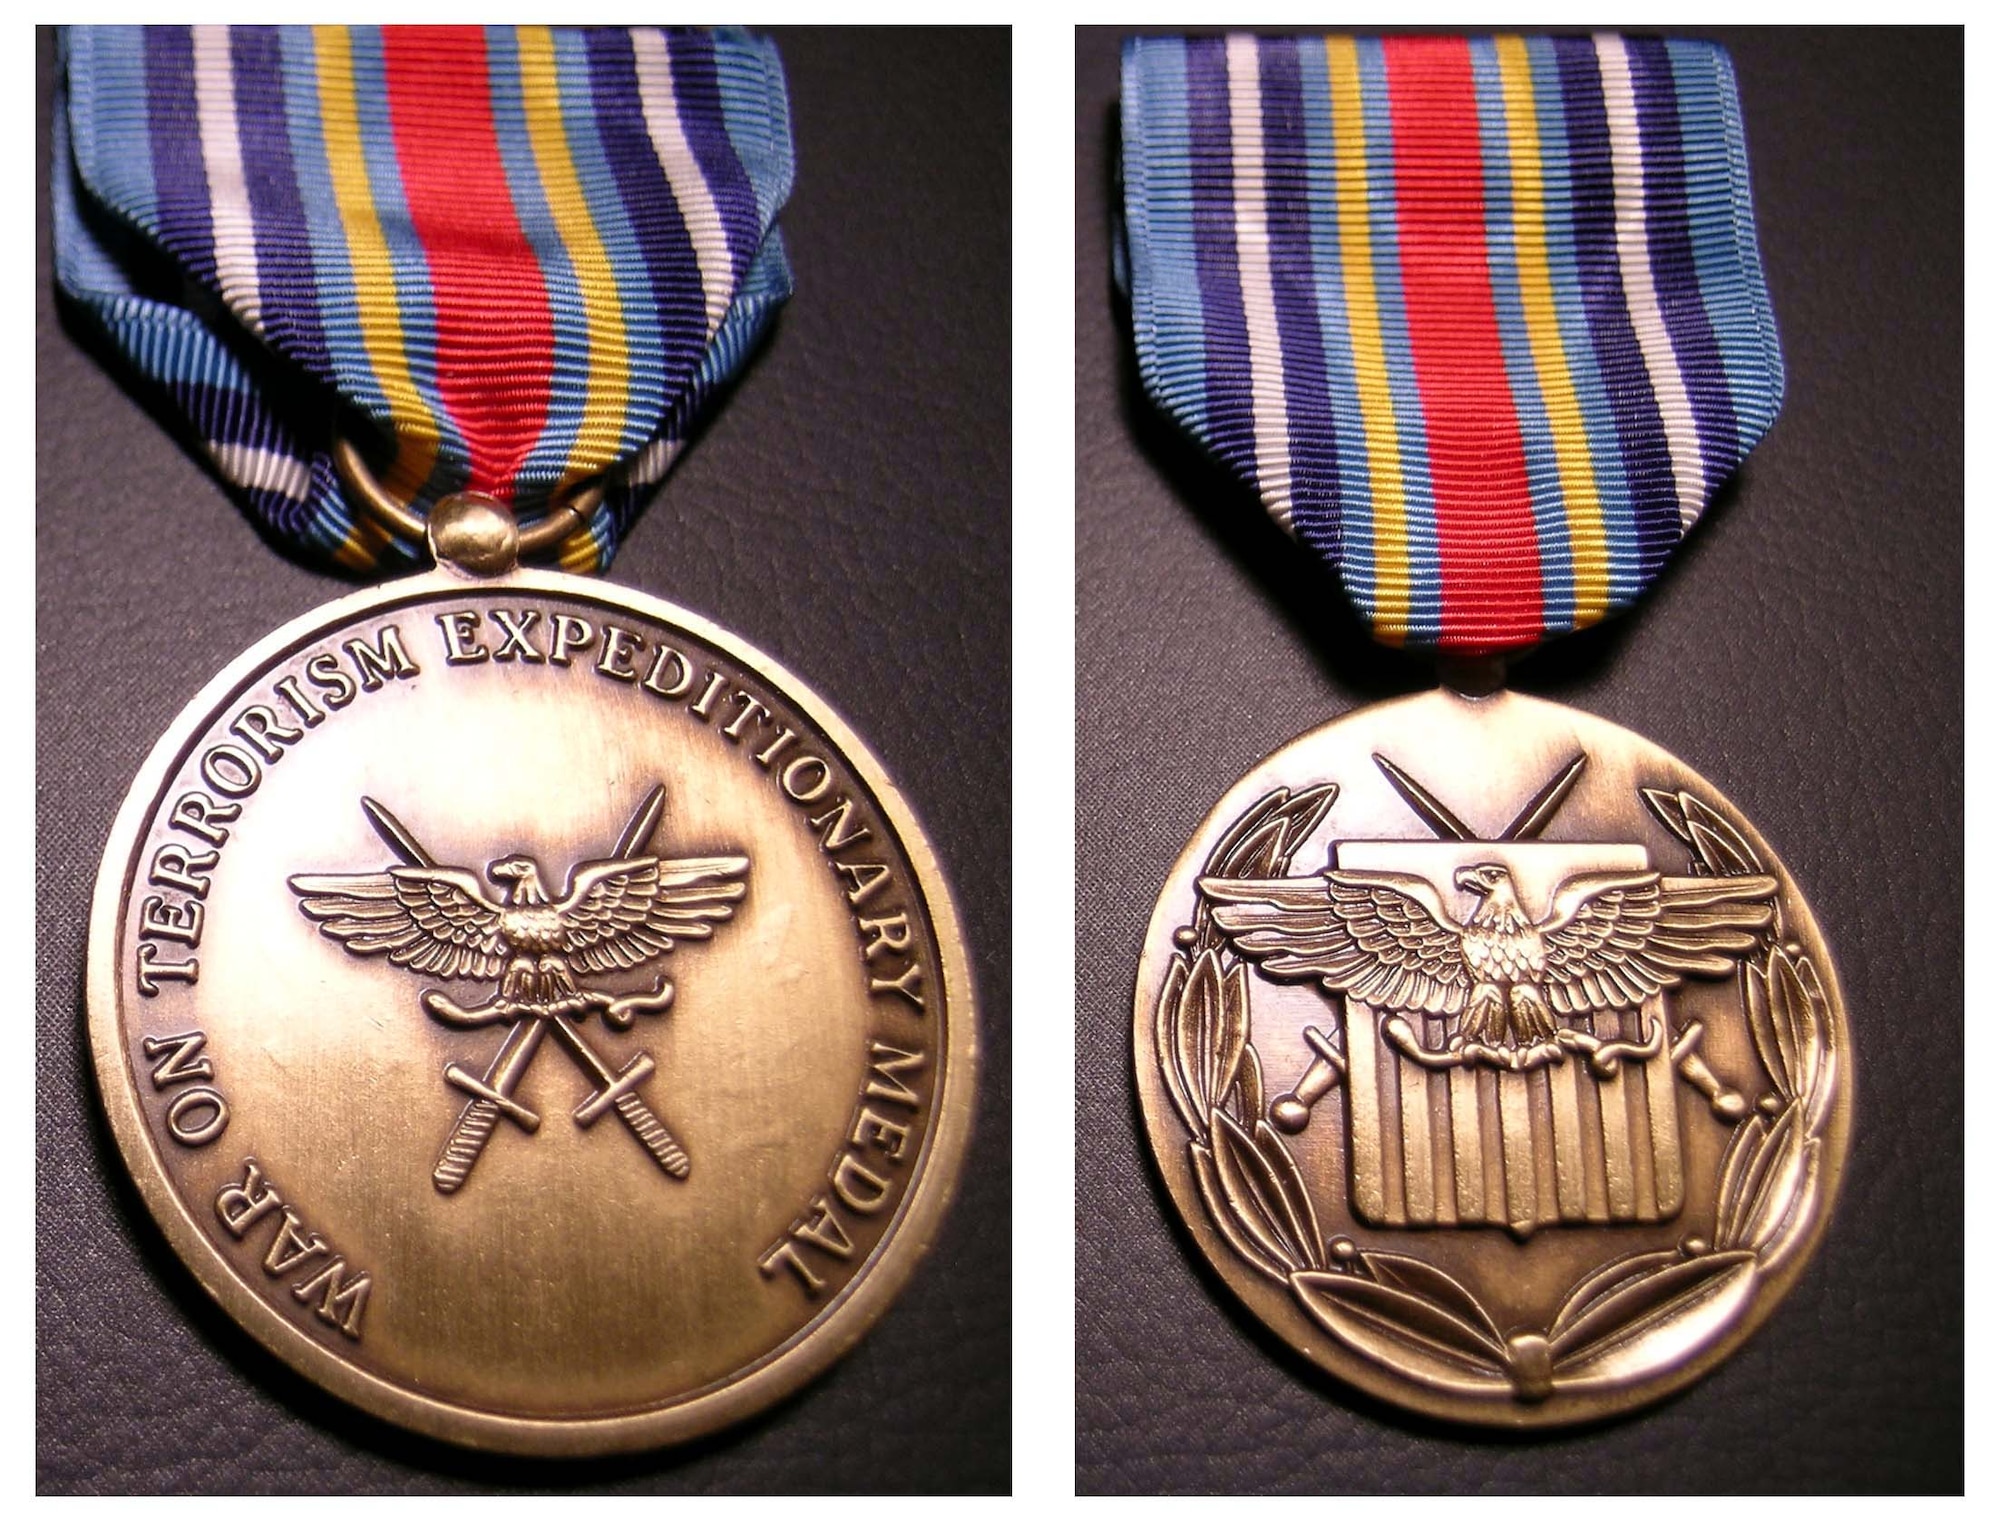 WASHINGTON -- The front of the Global War on Terrorism Expeditionary Medal features a shield adapted from the Great Seal of the United States.  The back includes the eagle, serpent and swords from the medal's front-side design along with the inscription "War on Terrorism Expeditionary Medal."  The medal's final approval was announced Feb. 26.  (Courtesy photo)